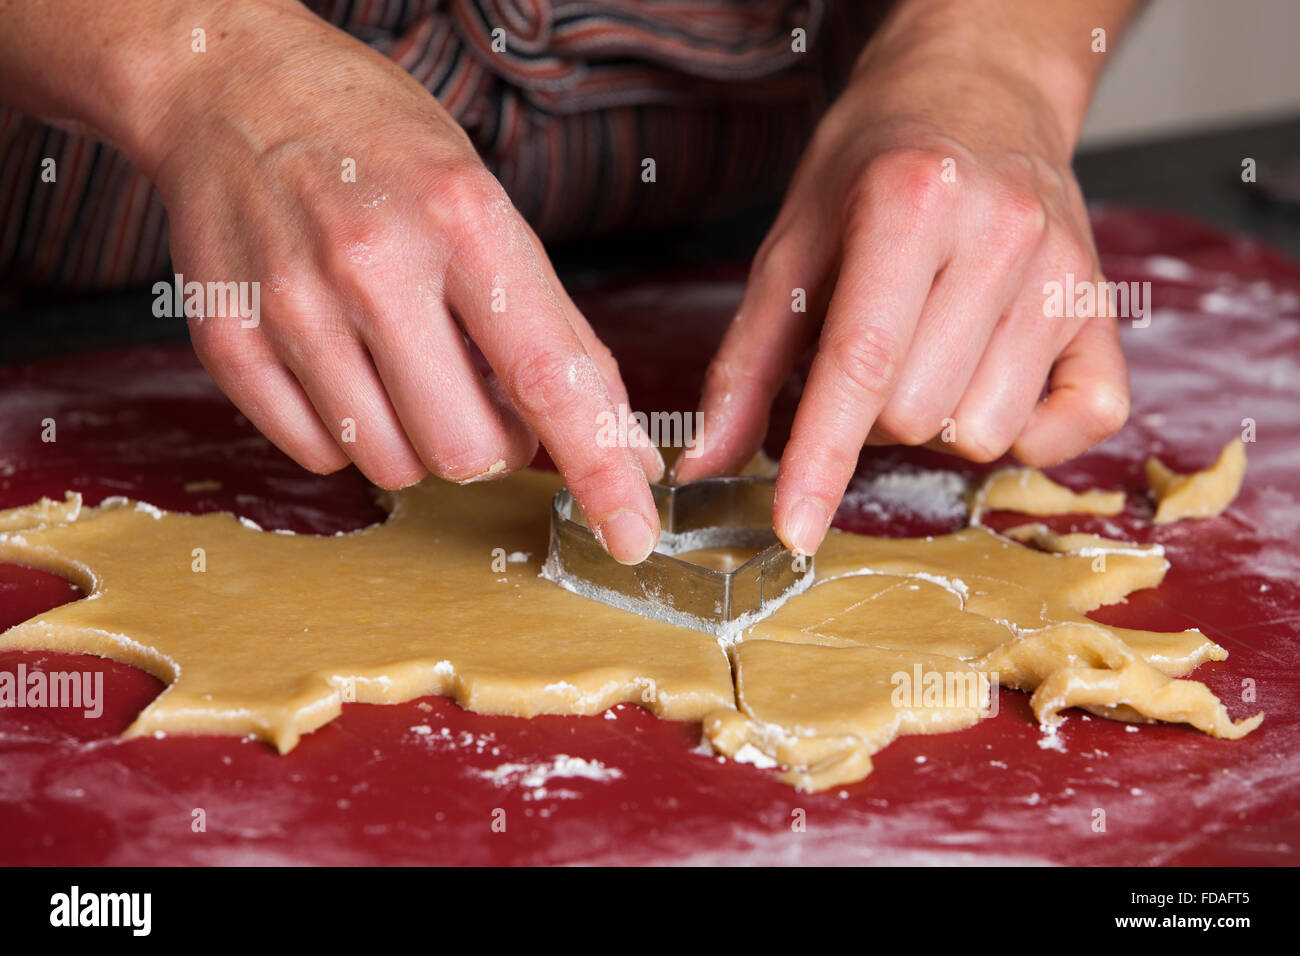 Woman cutting cookie shapes out of dough Stock Photo